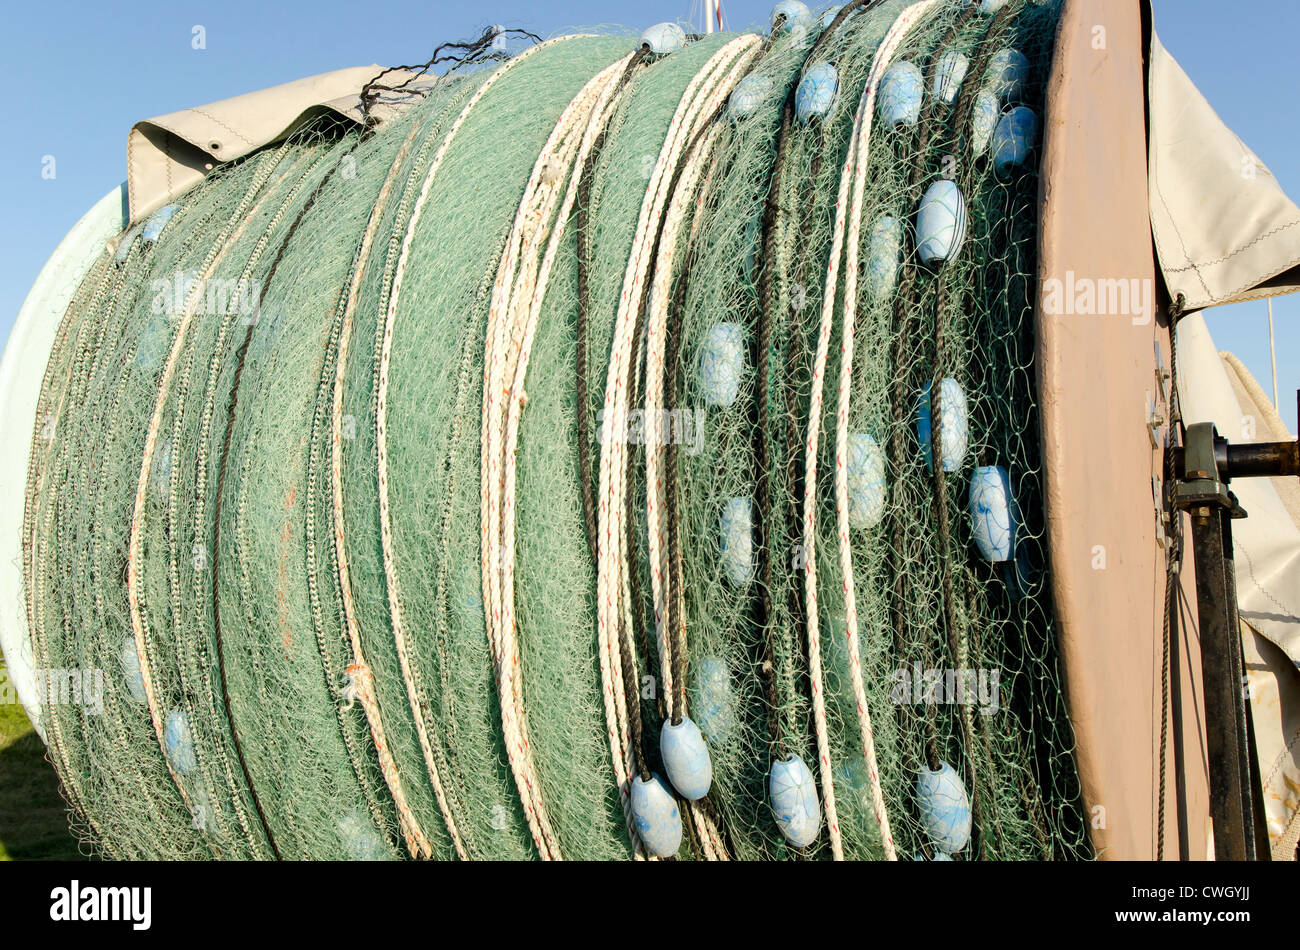 Monofilament trawler fishing net and floats rolled up for storage out of water, Wanchese North Carolina Outer Banks Stock Photo